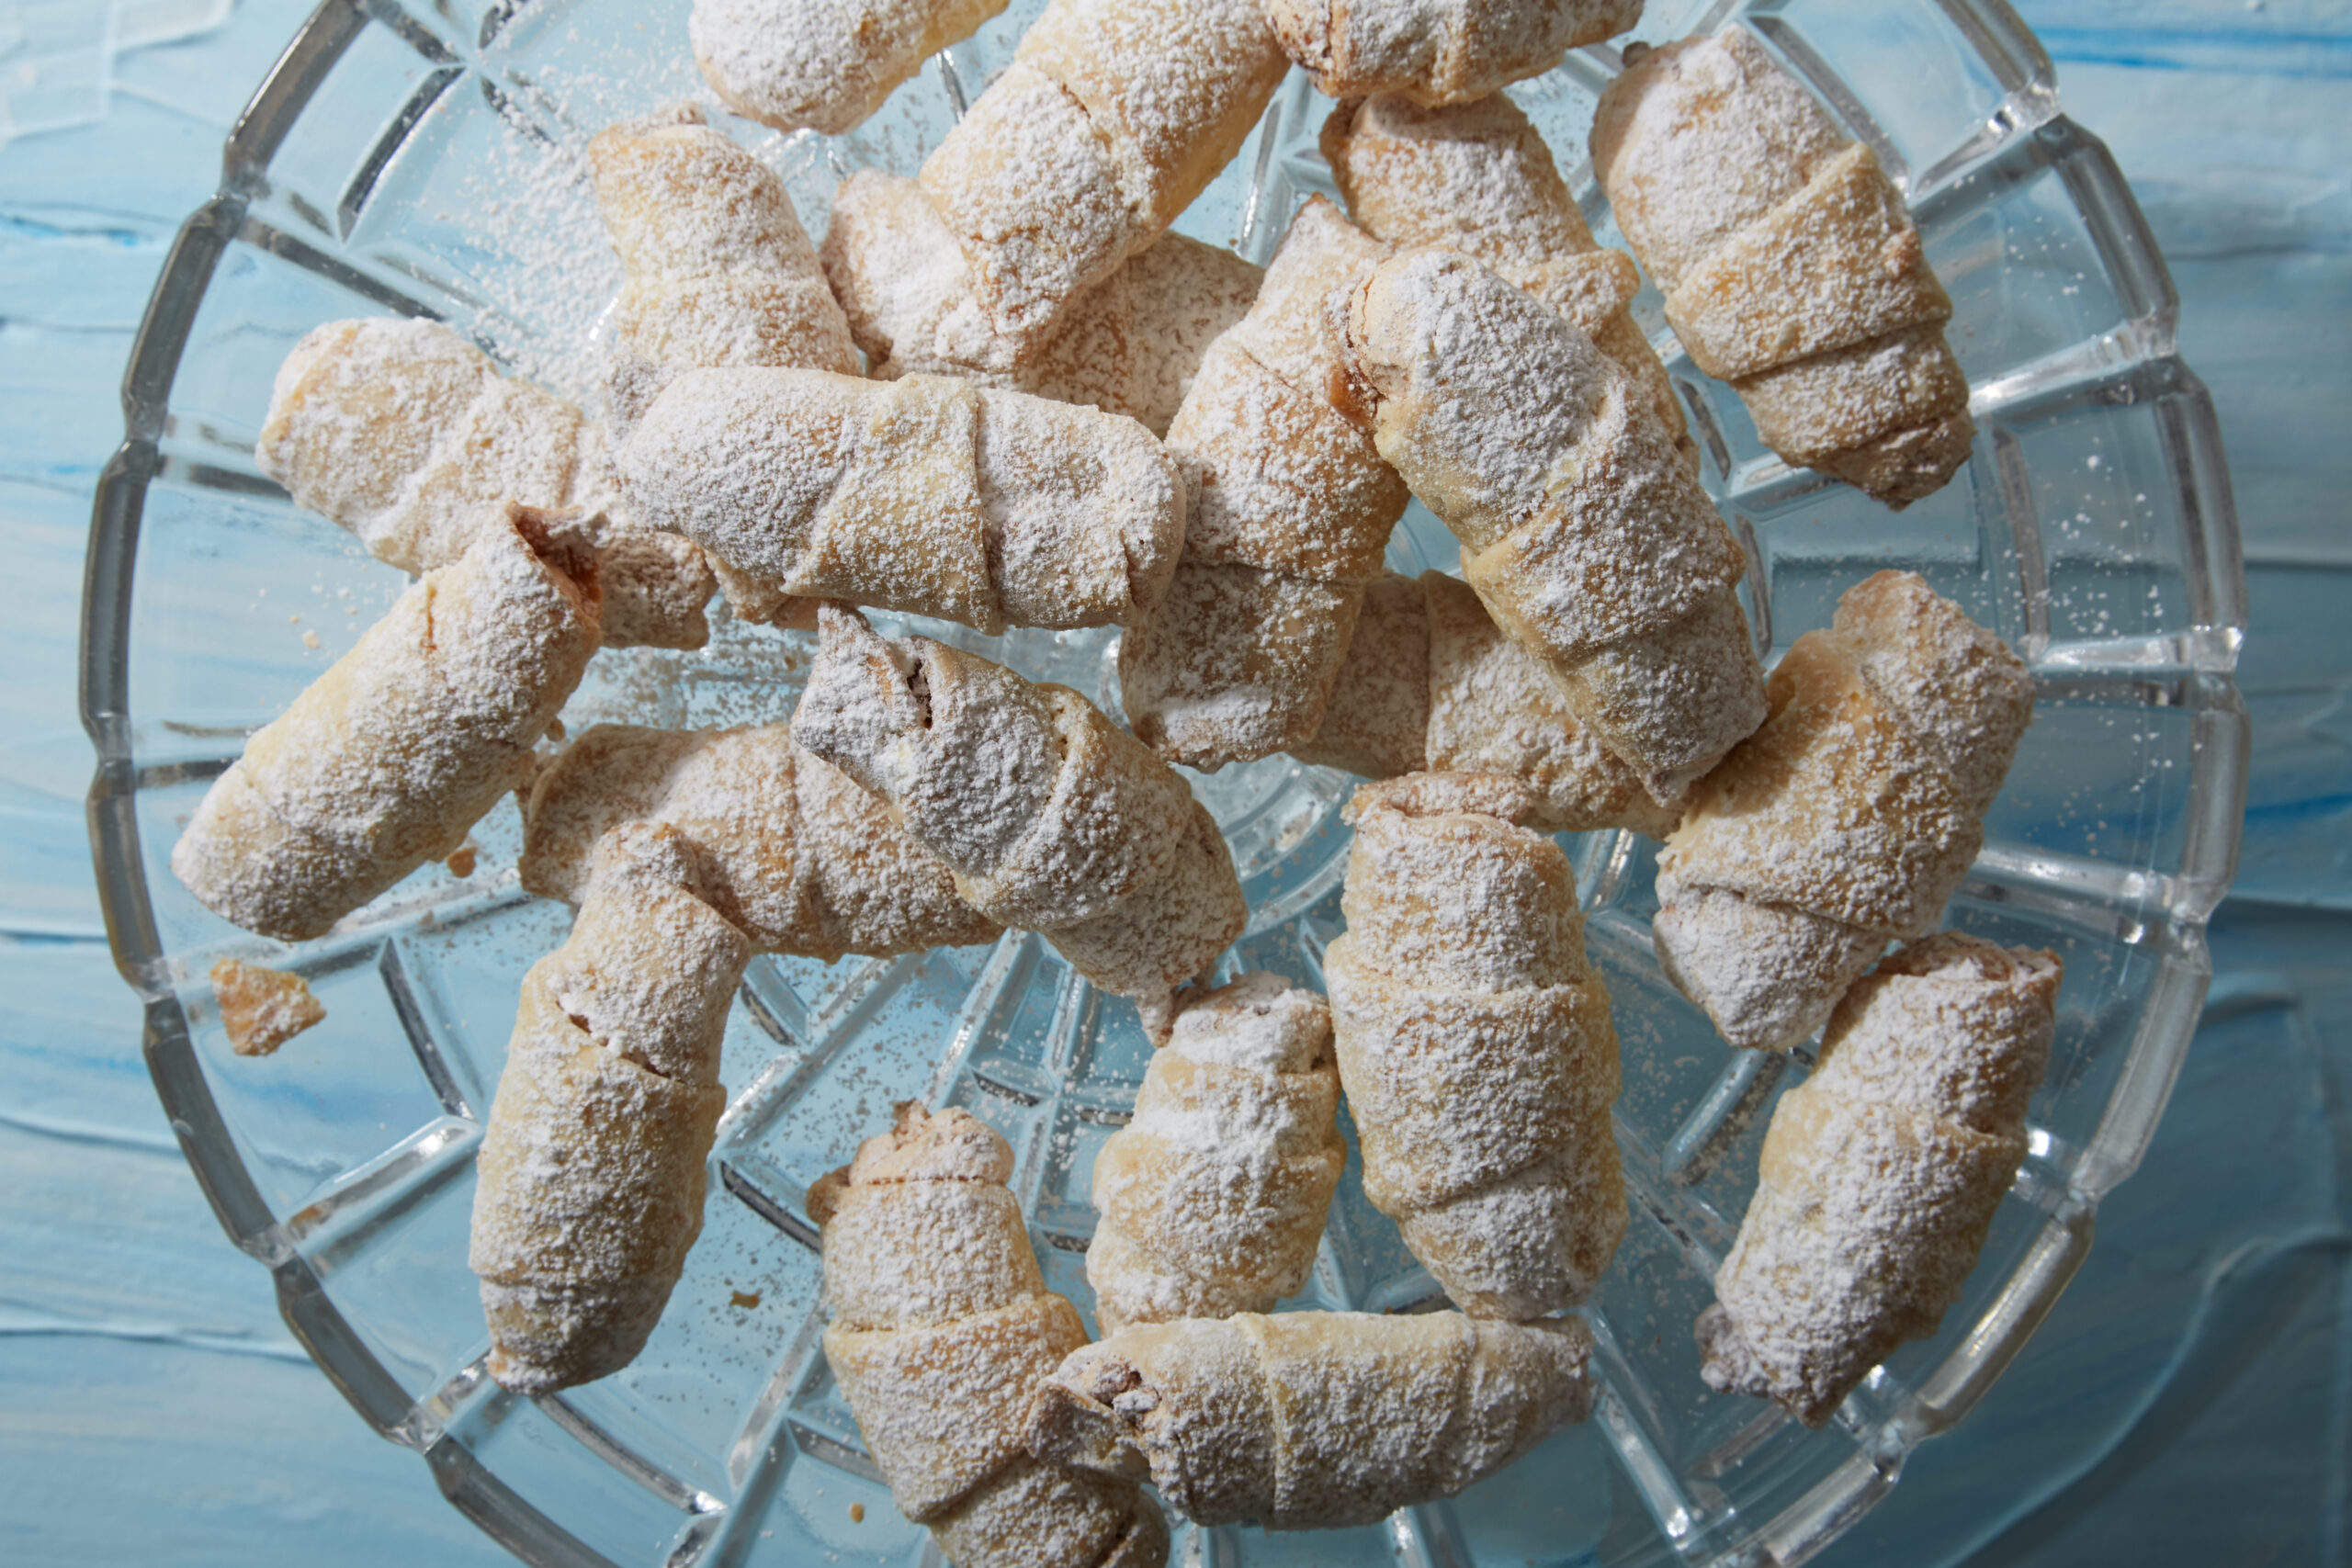 Small rugelach pastries dusted with powdered sugar on glass tray